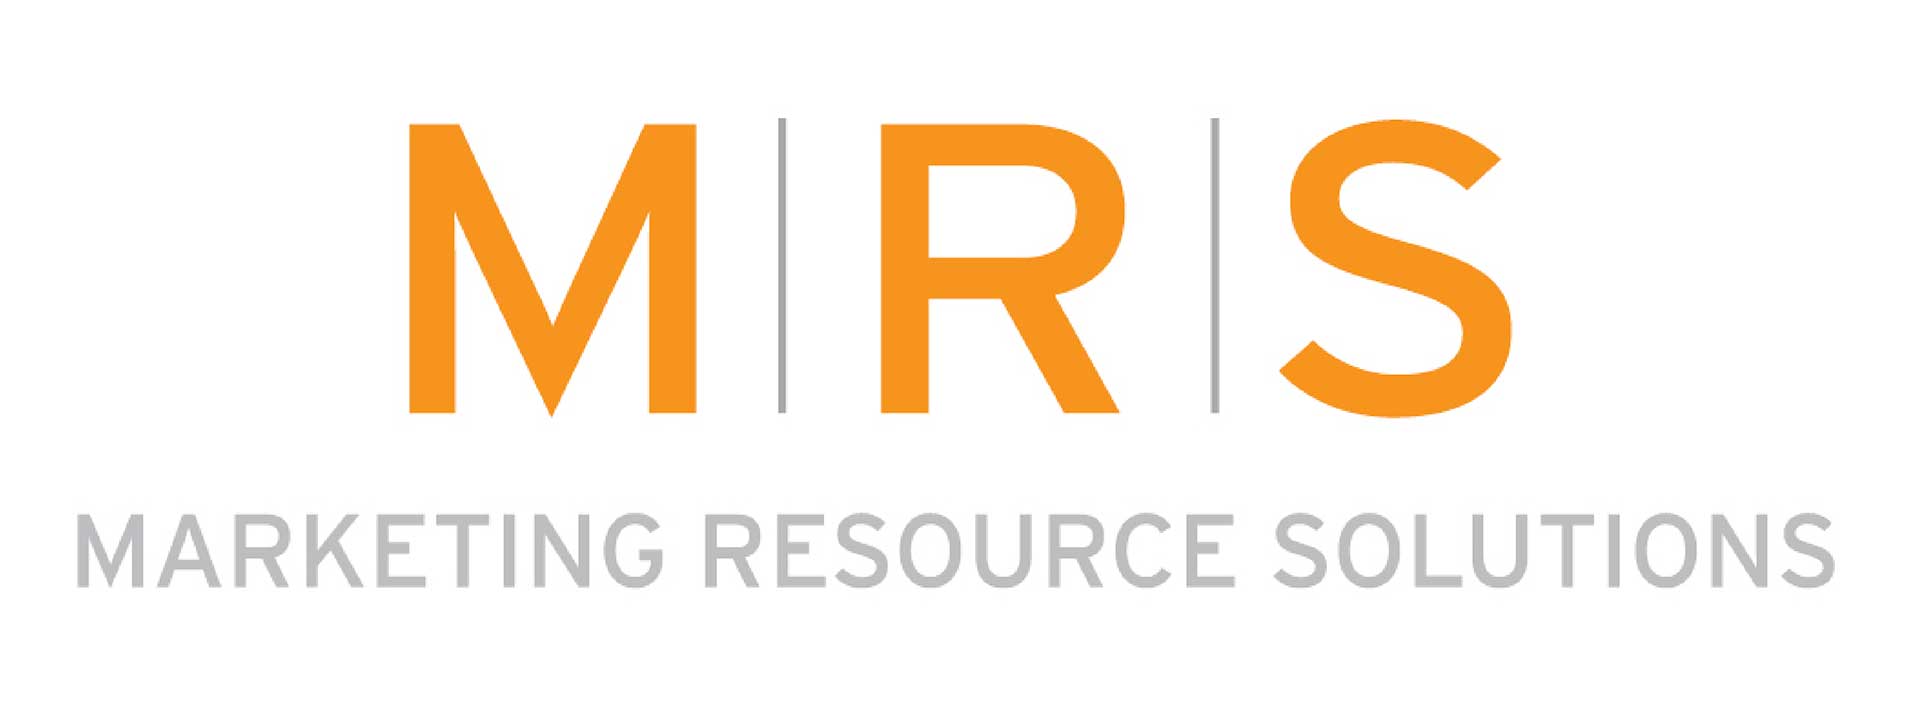 Marketing Resource Solutions